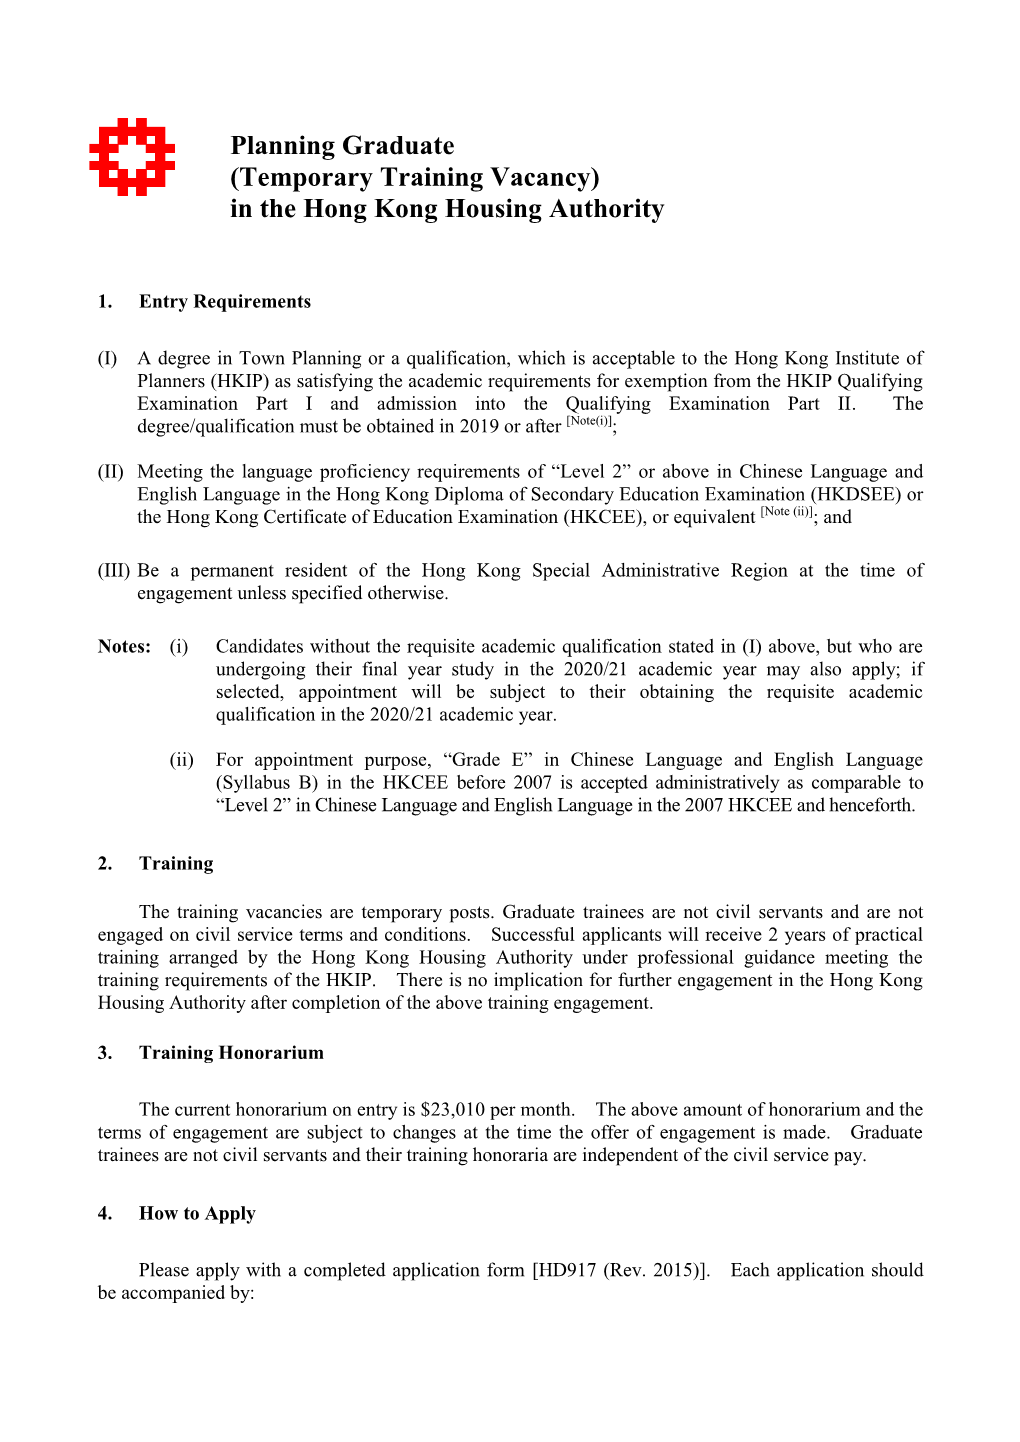 (Temporary Training Vacancy) in the Hong Kong Housing Authority